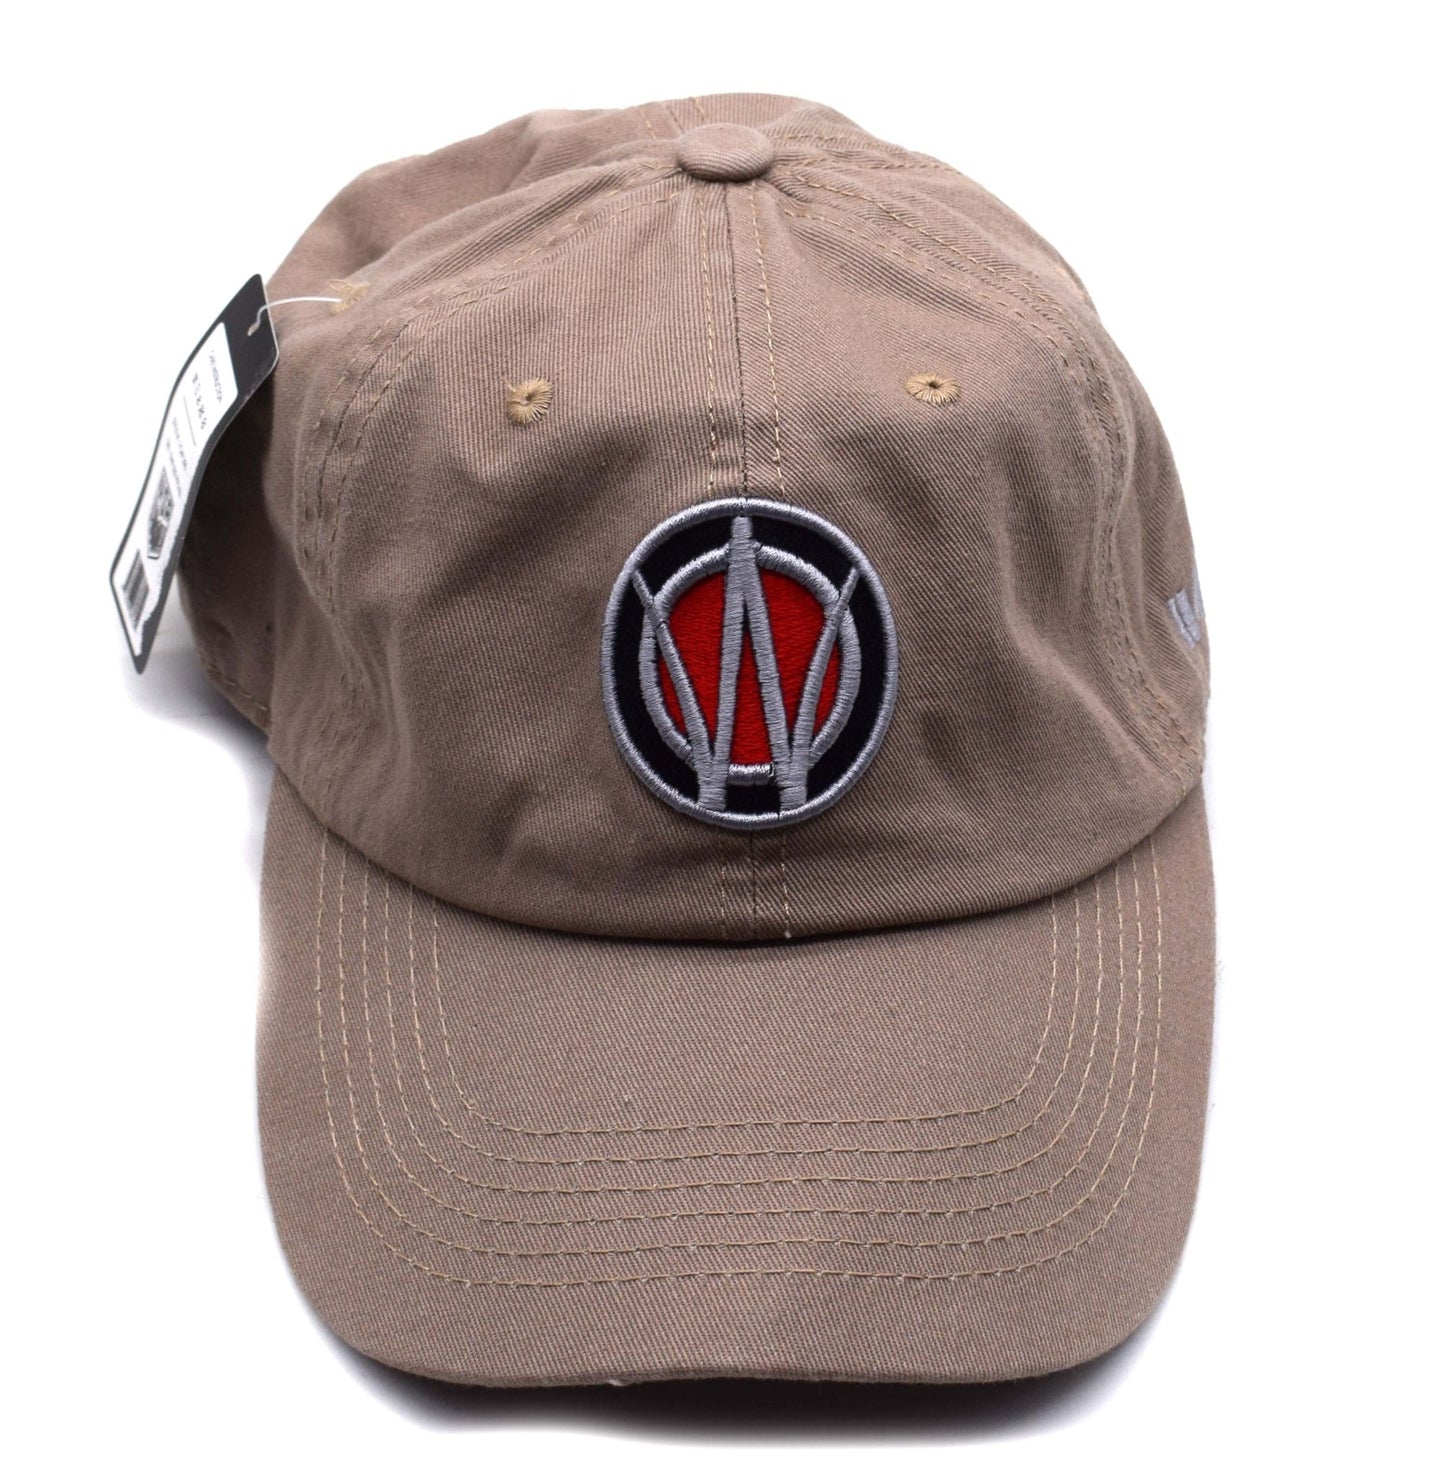 Willys Overland Embroidered Khaki Cloth Hat, 1941-1971, Willys and Jeep - The JeepsterMan